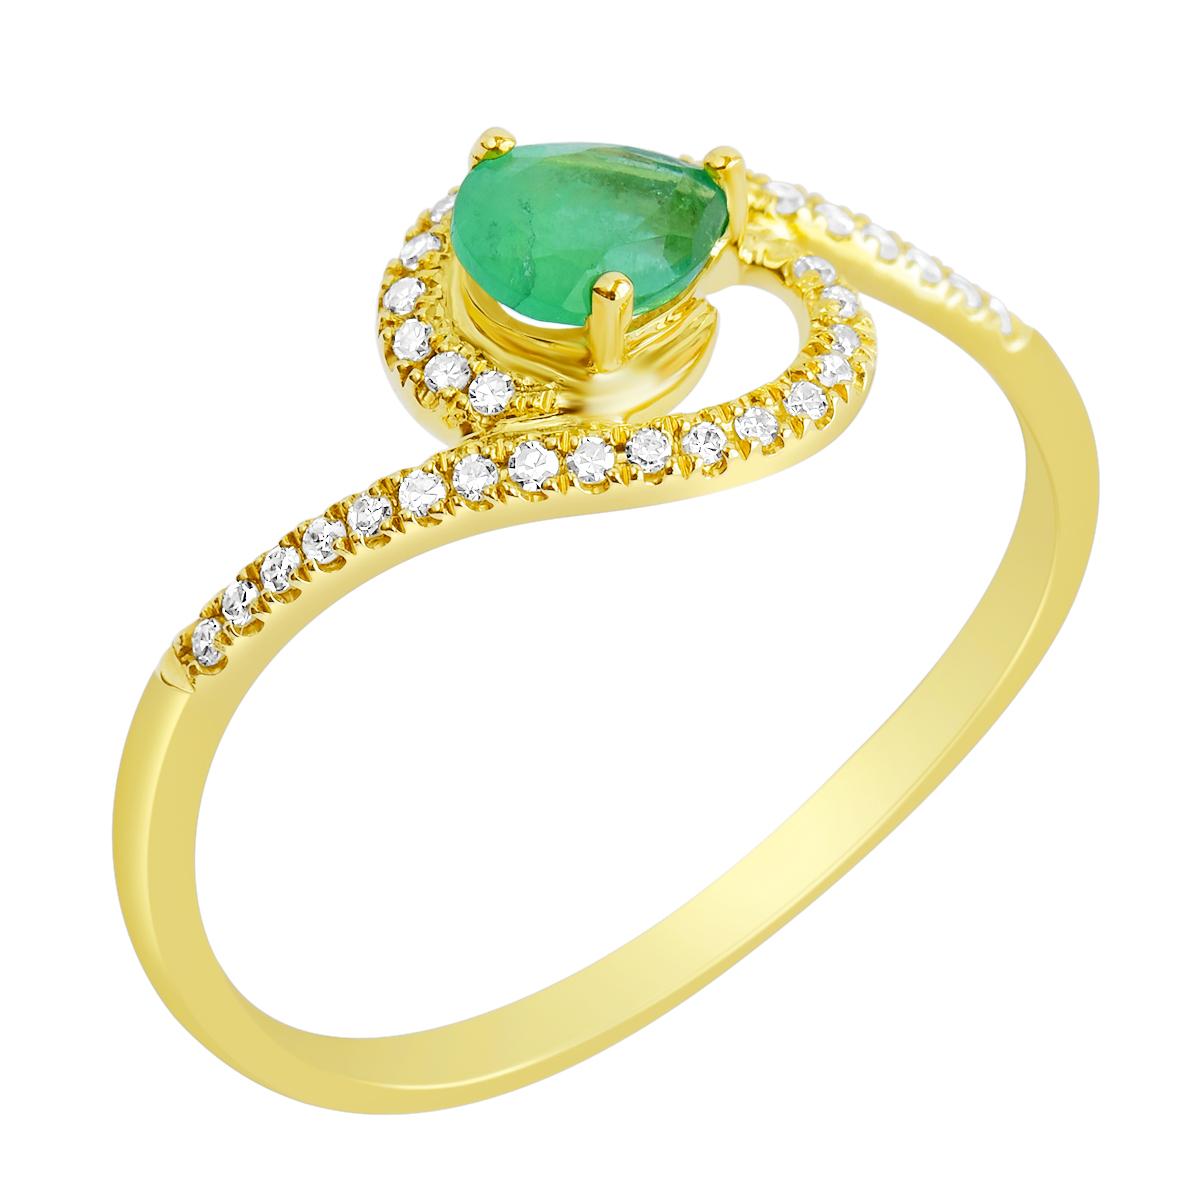 Contemporary 0.30 Carat Natural Pear Emerald Solid Gold Ring with 34 Microset Bright Diamonds